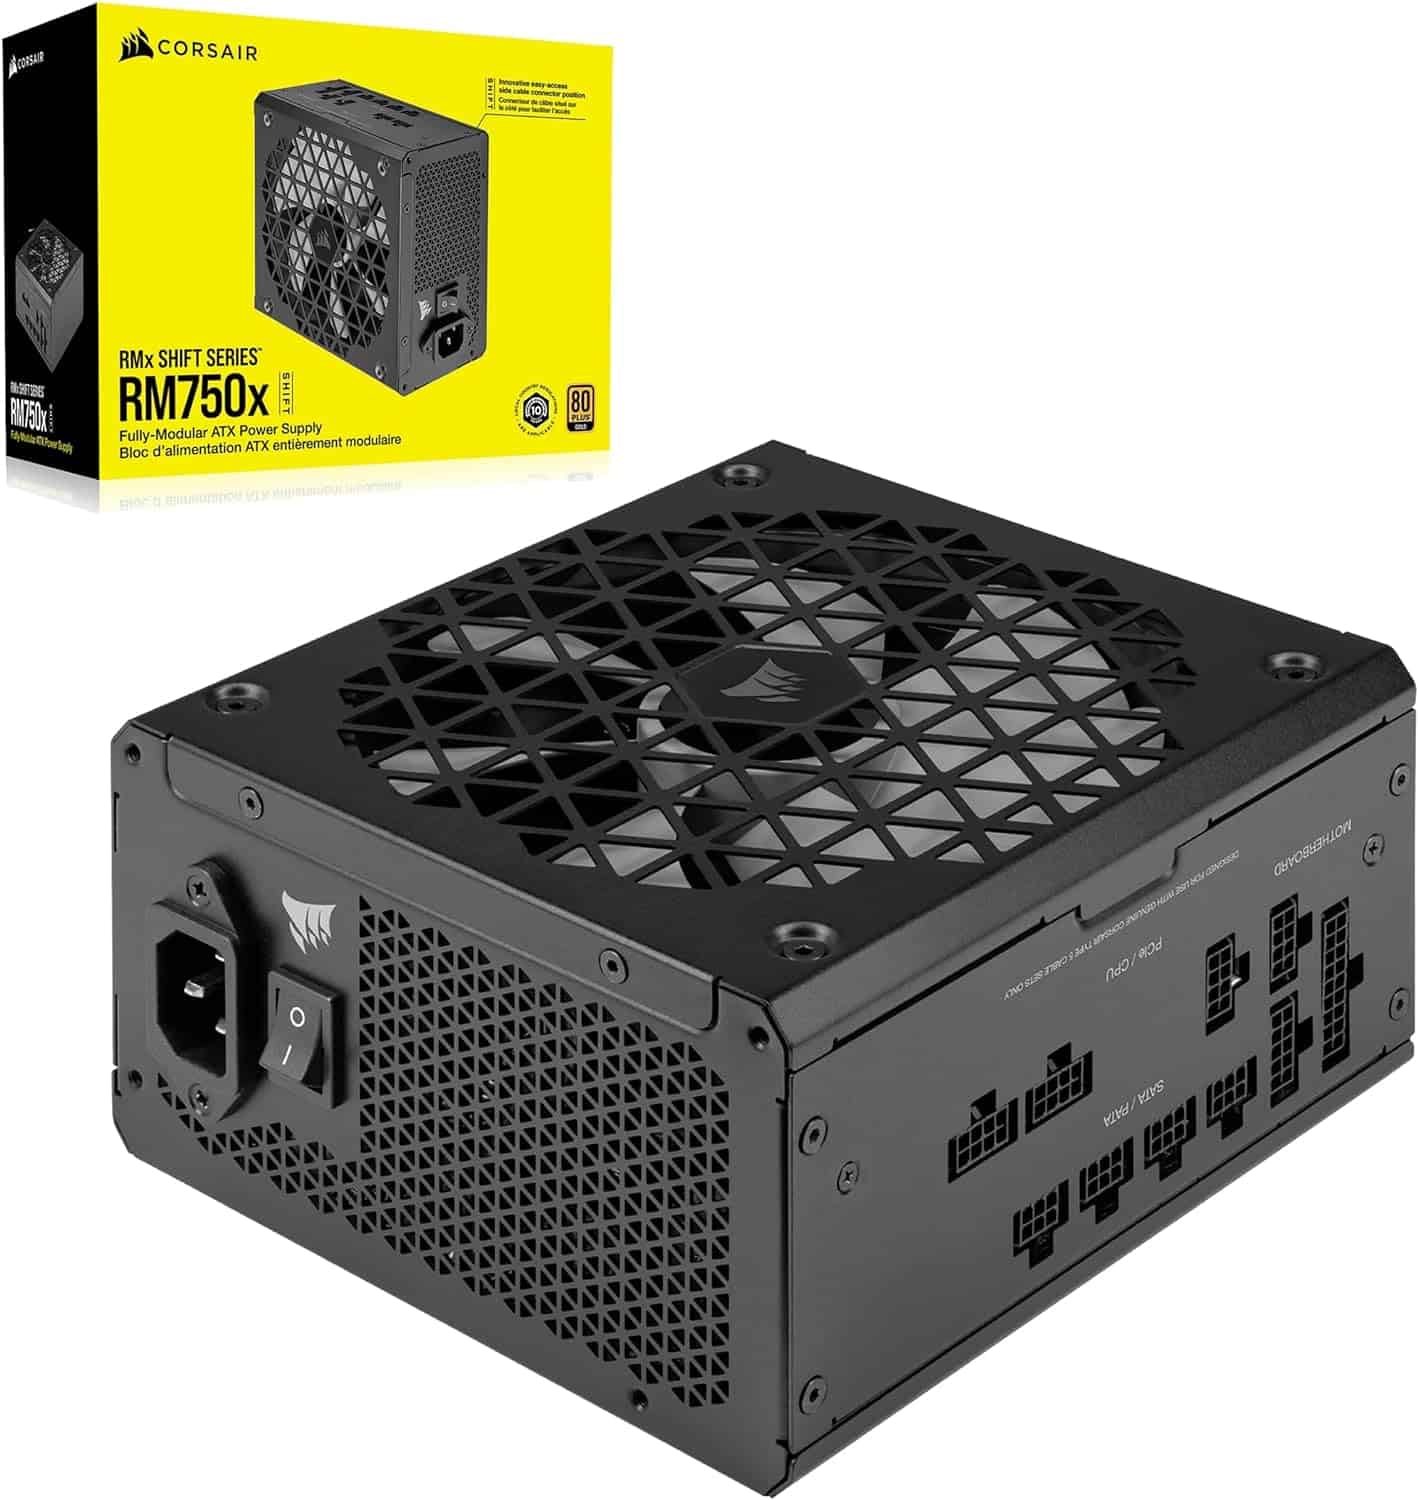 Power up your PC with EVGA's Supernova 650W 80 Plus Gold PSU for just $50